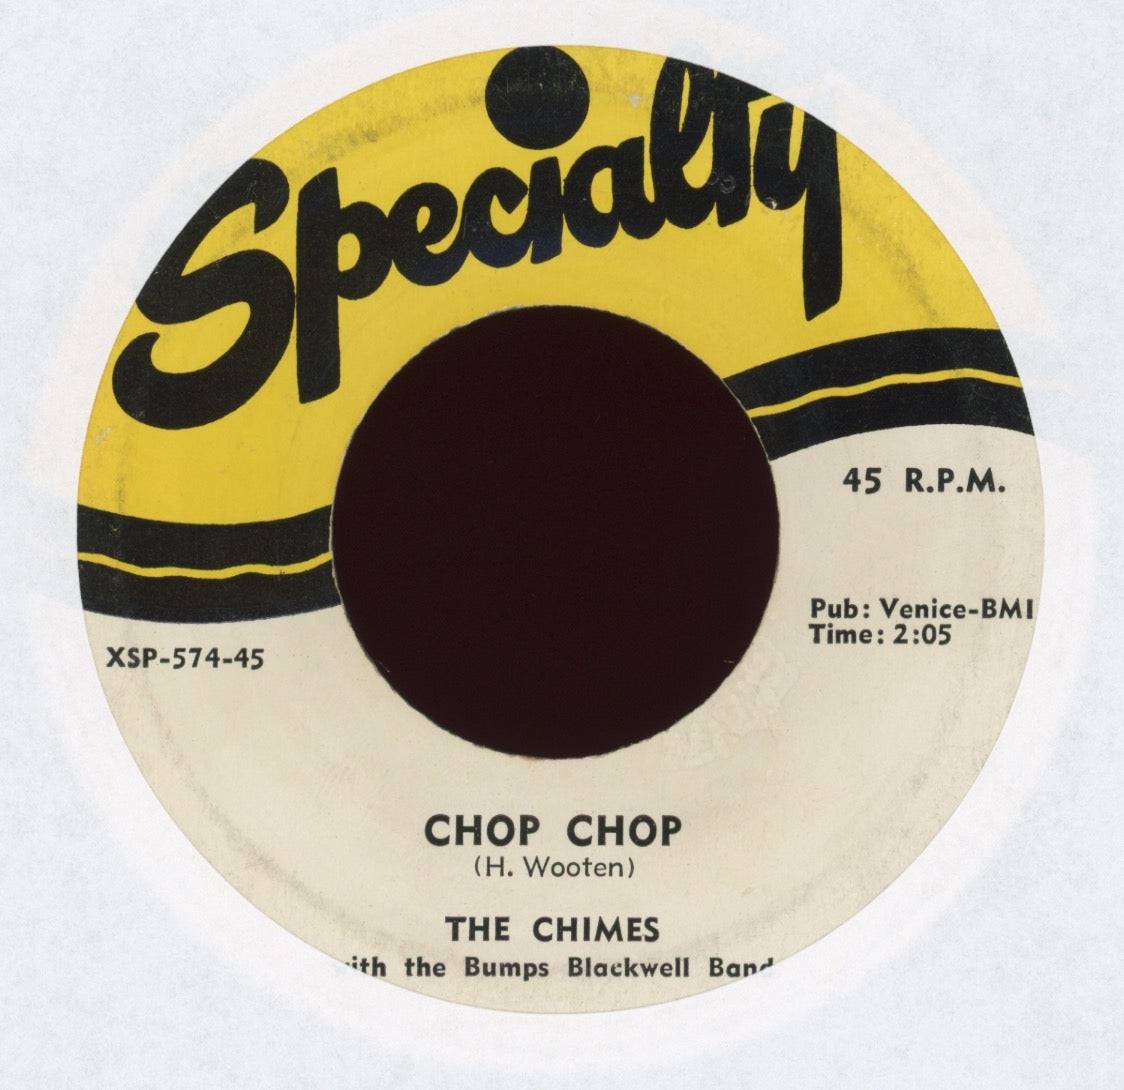 The Chimes - Chop Chop on Specialty